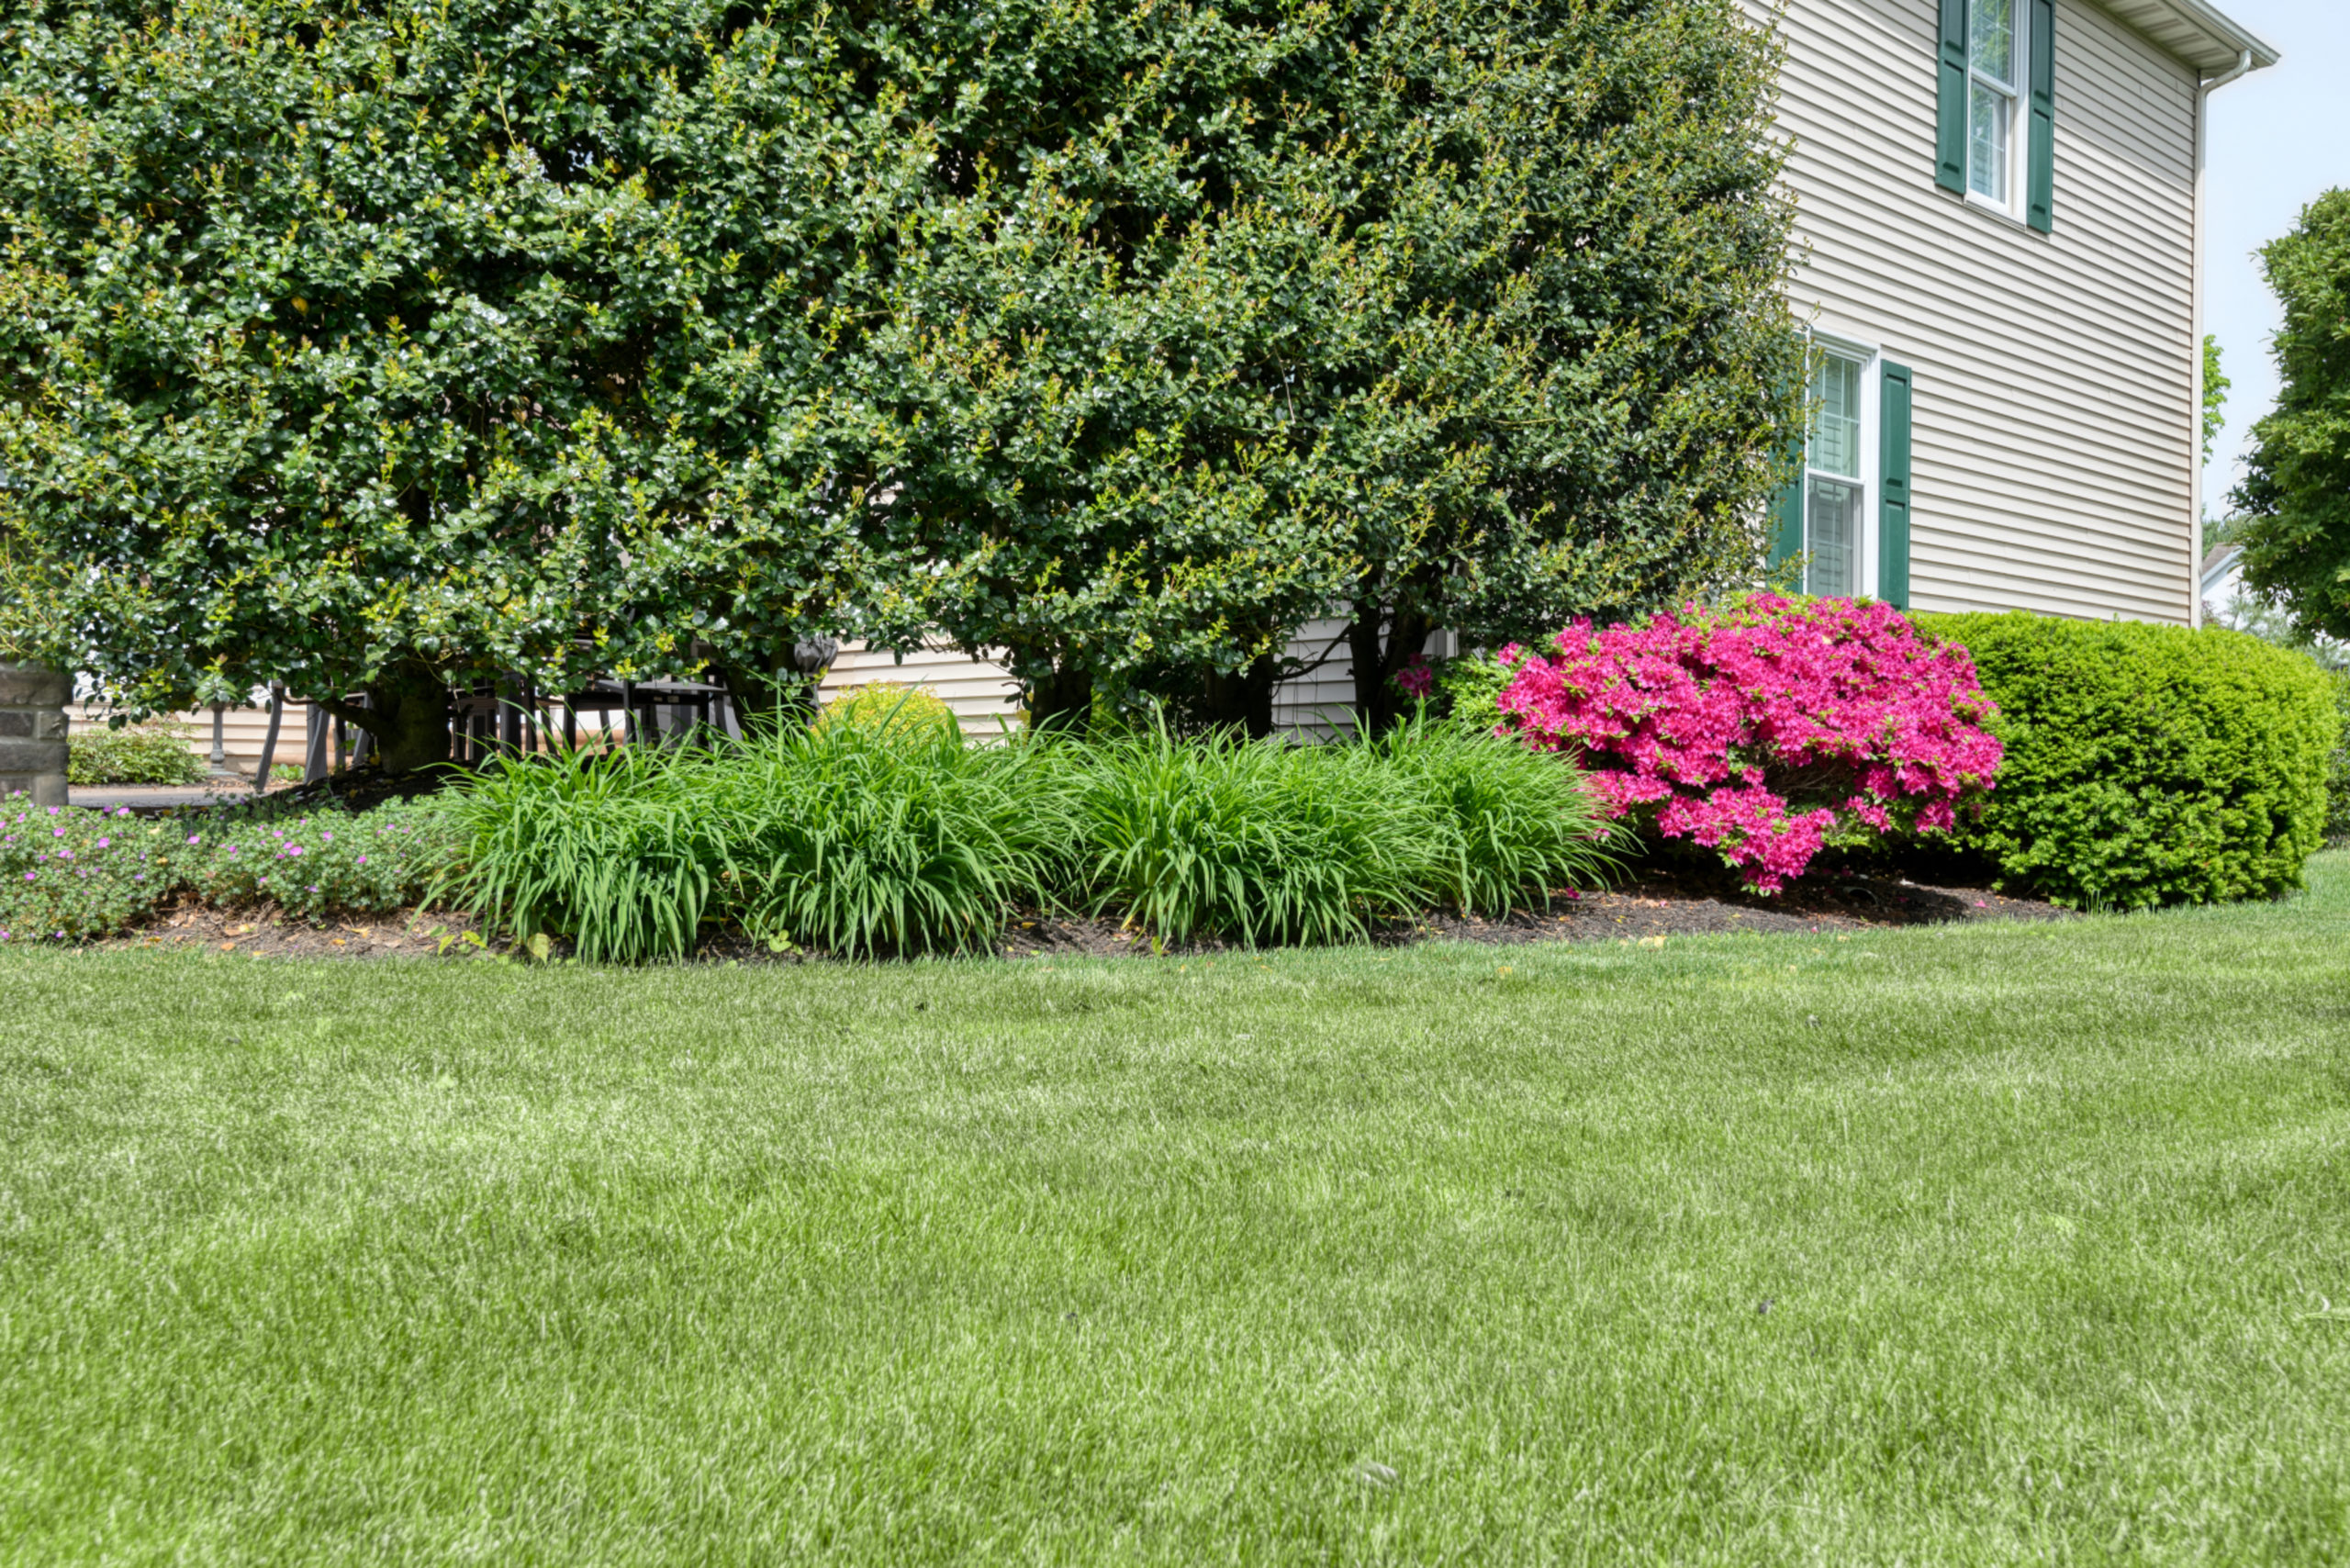 Apply pre emergent product to your lawn to reduce weeds